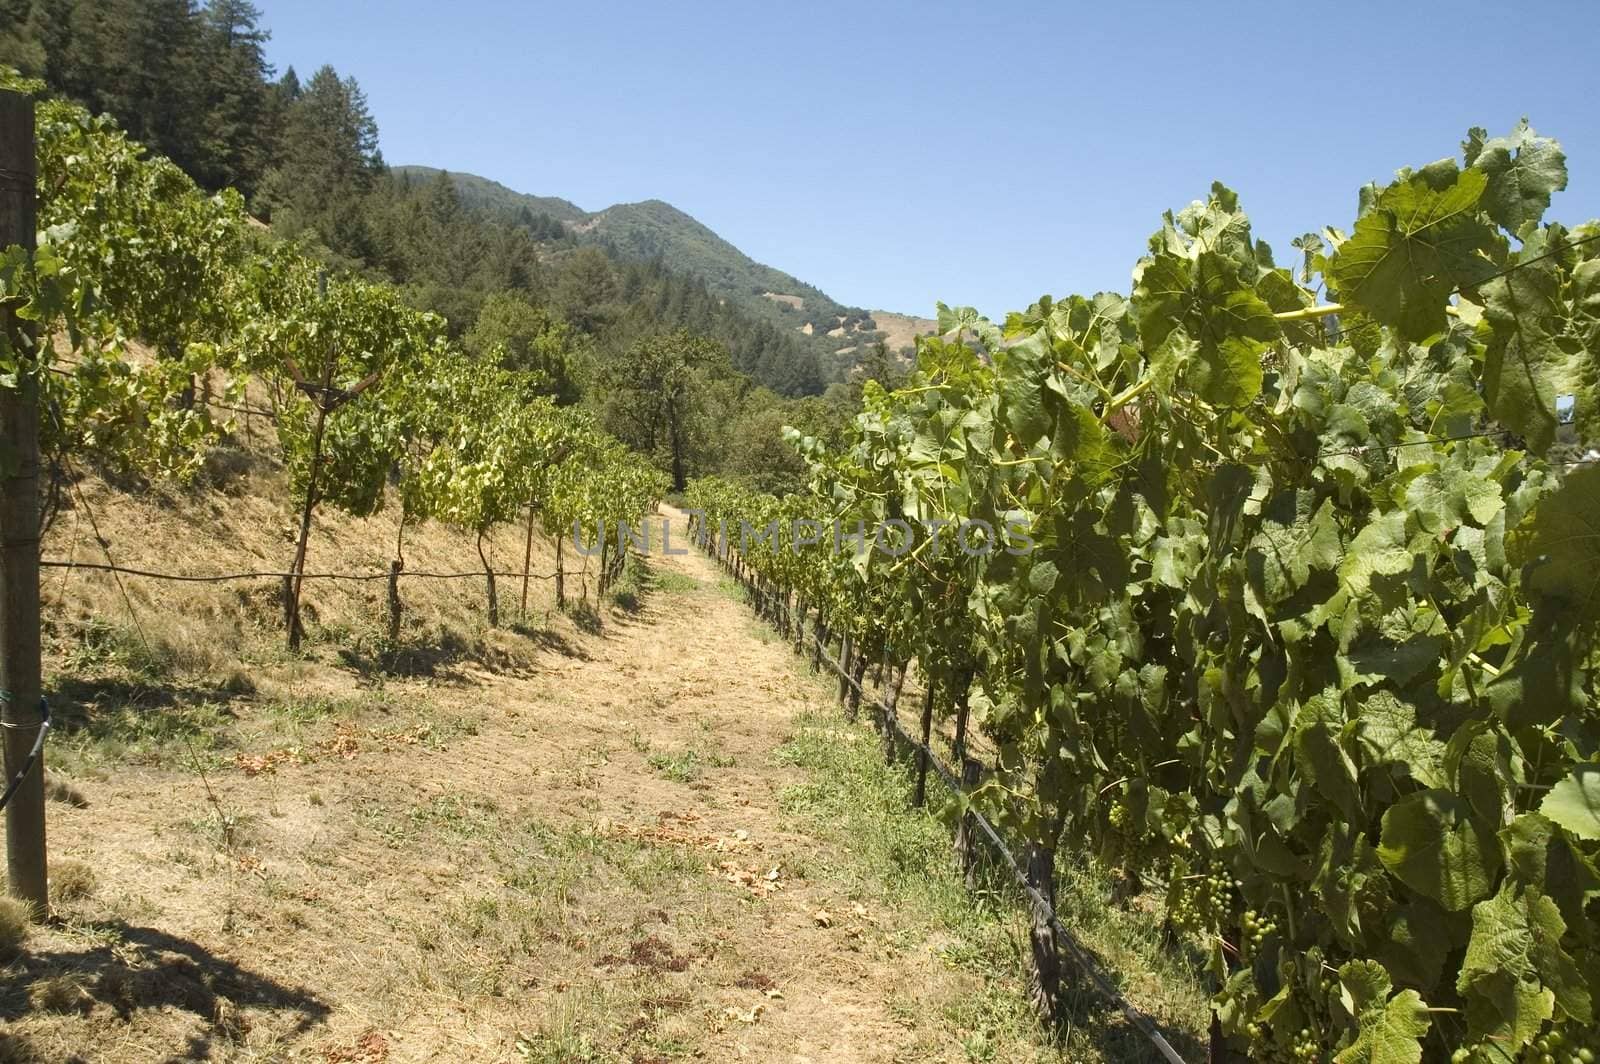 Rows of supported and trained vines in a terraced vineyard in the rolling hills of Northern California 